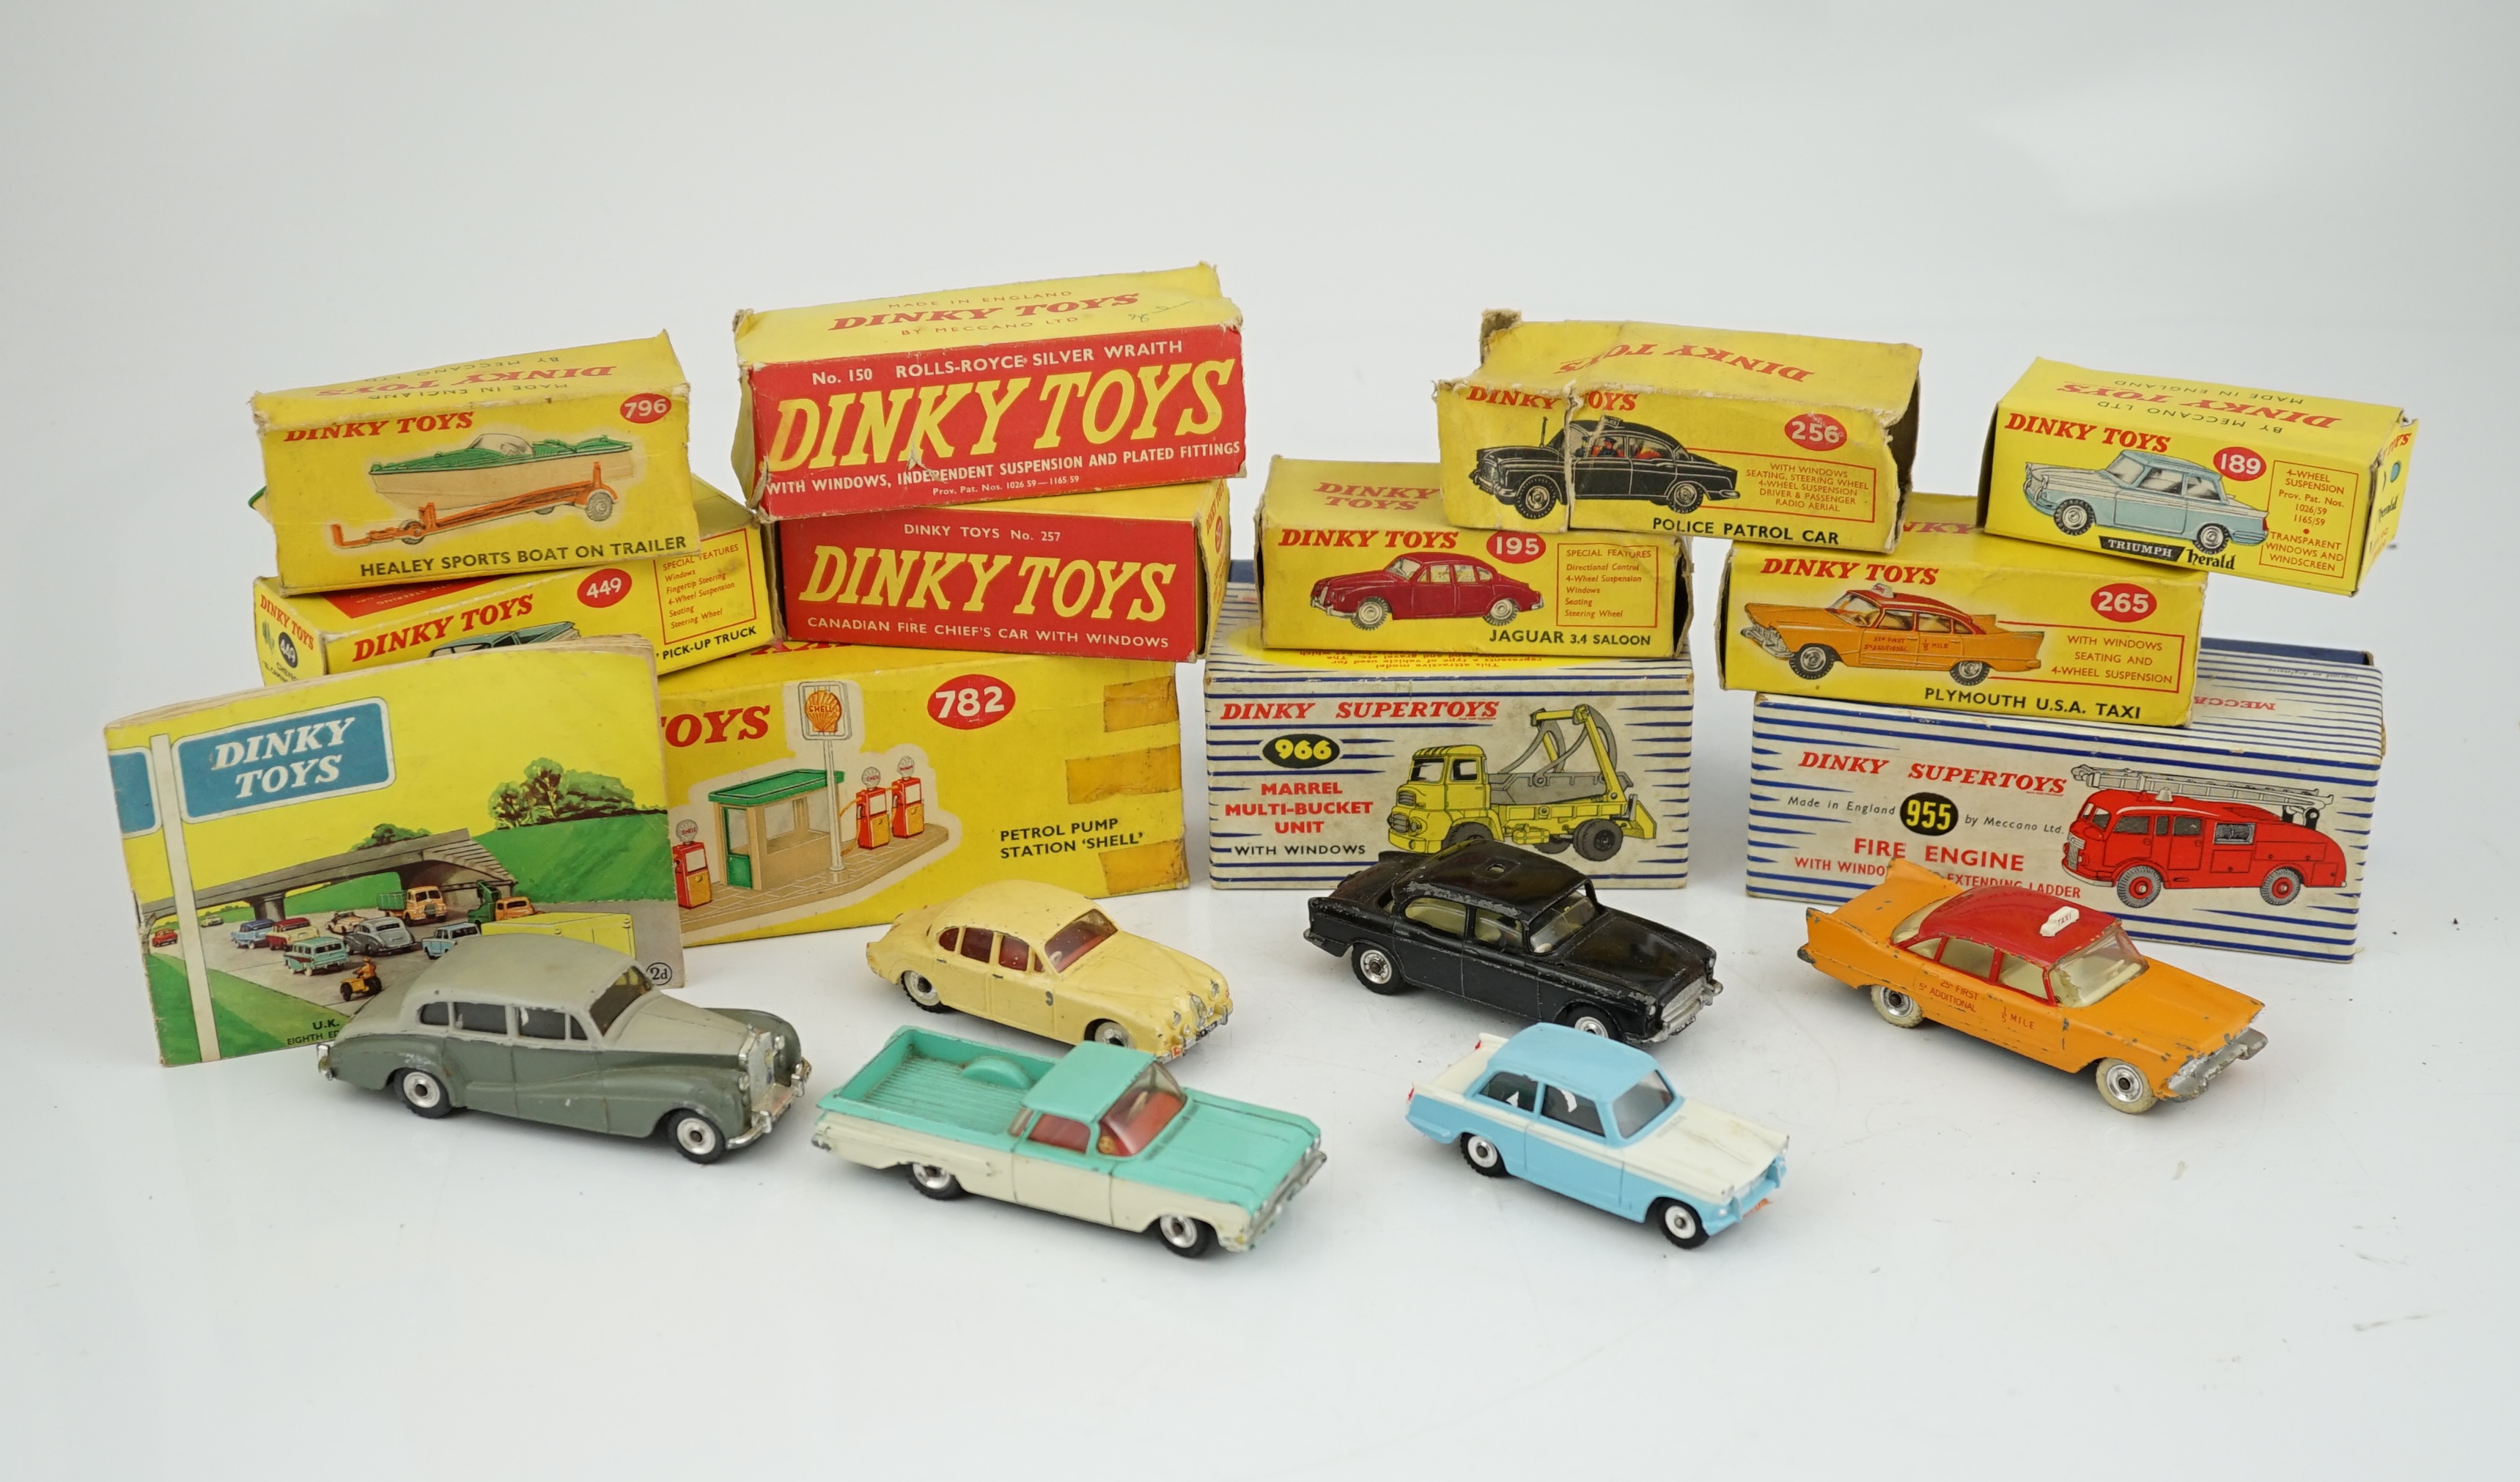 Eleven boxed Dinky Toys                                                                                                                                                                                                     